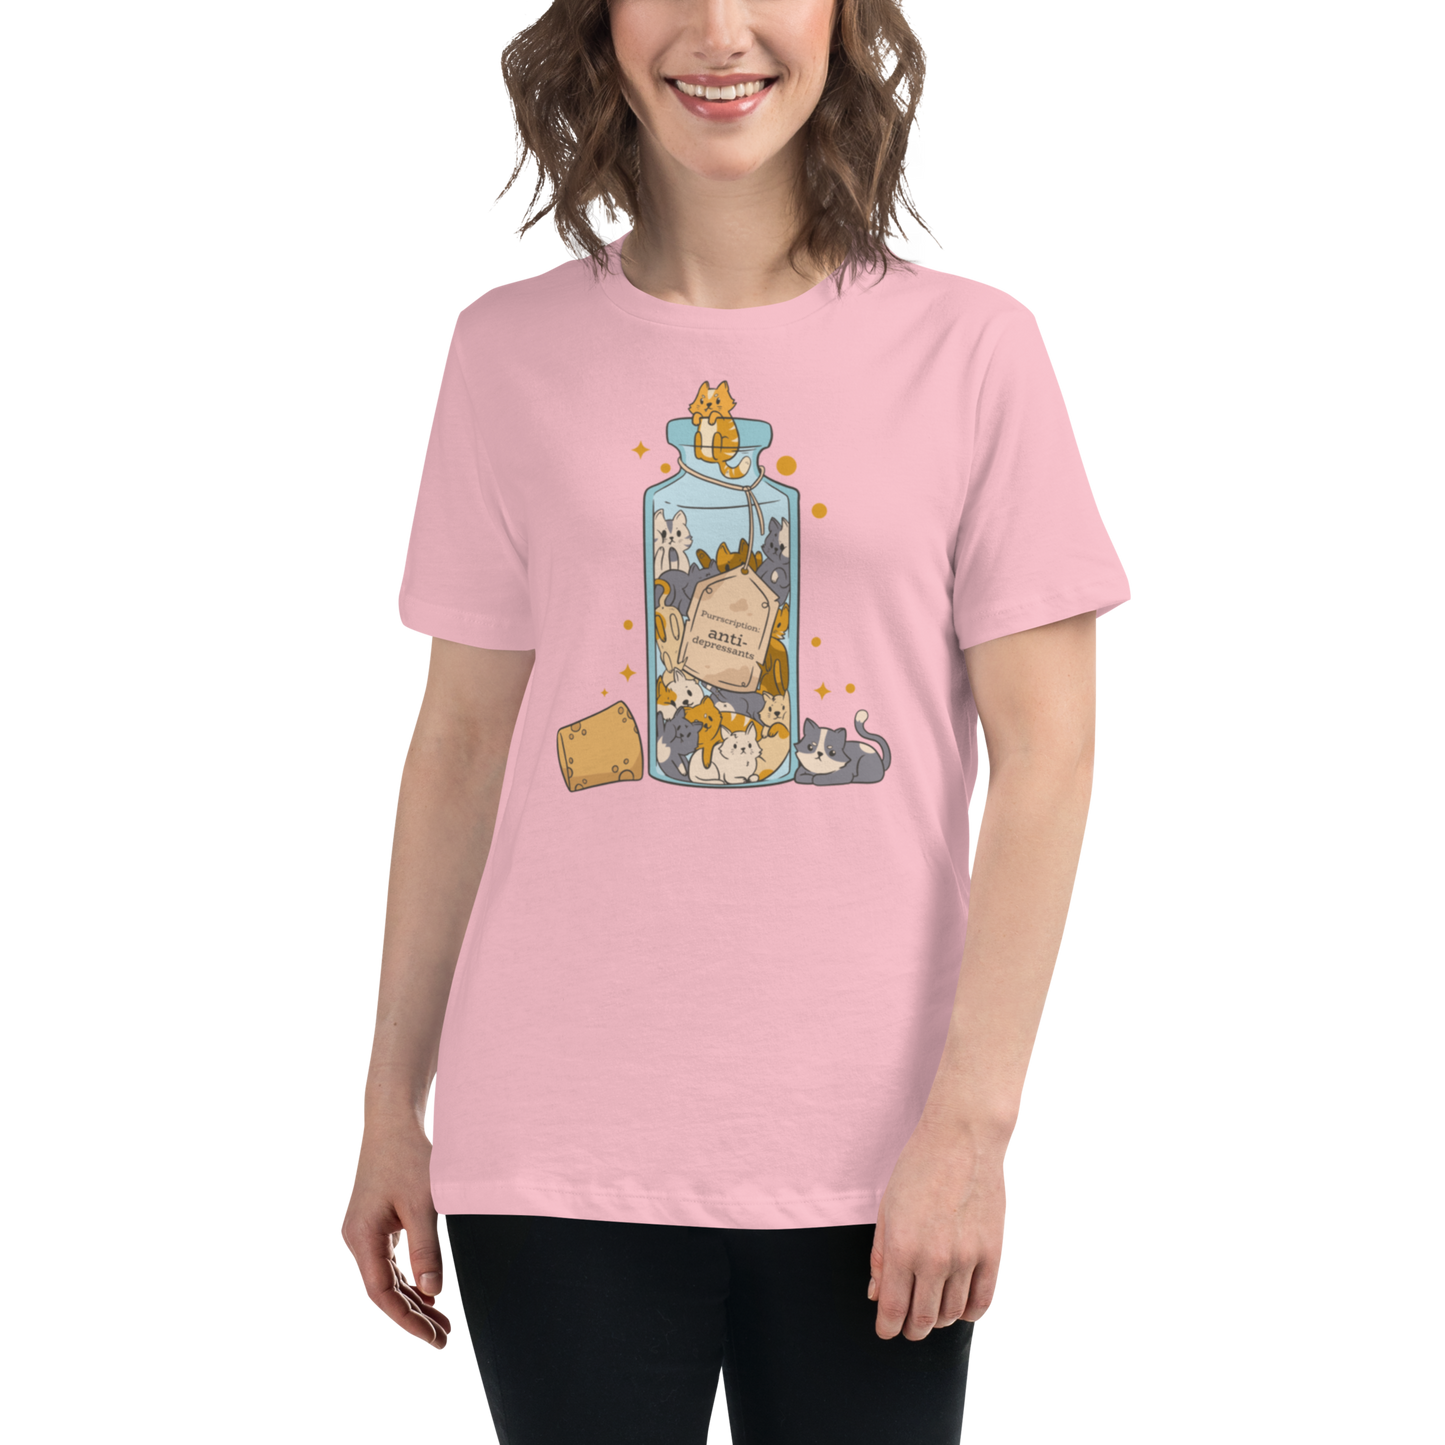 Smiling Woman Wearing a Women's relaxed Pink Cat t-shirt featuring a funny Anti-Depressants graphic on the chest - Women's Funny Graphic Cat Tees - Boozy Fox